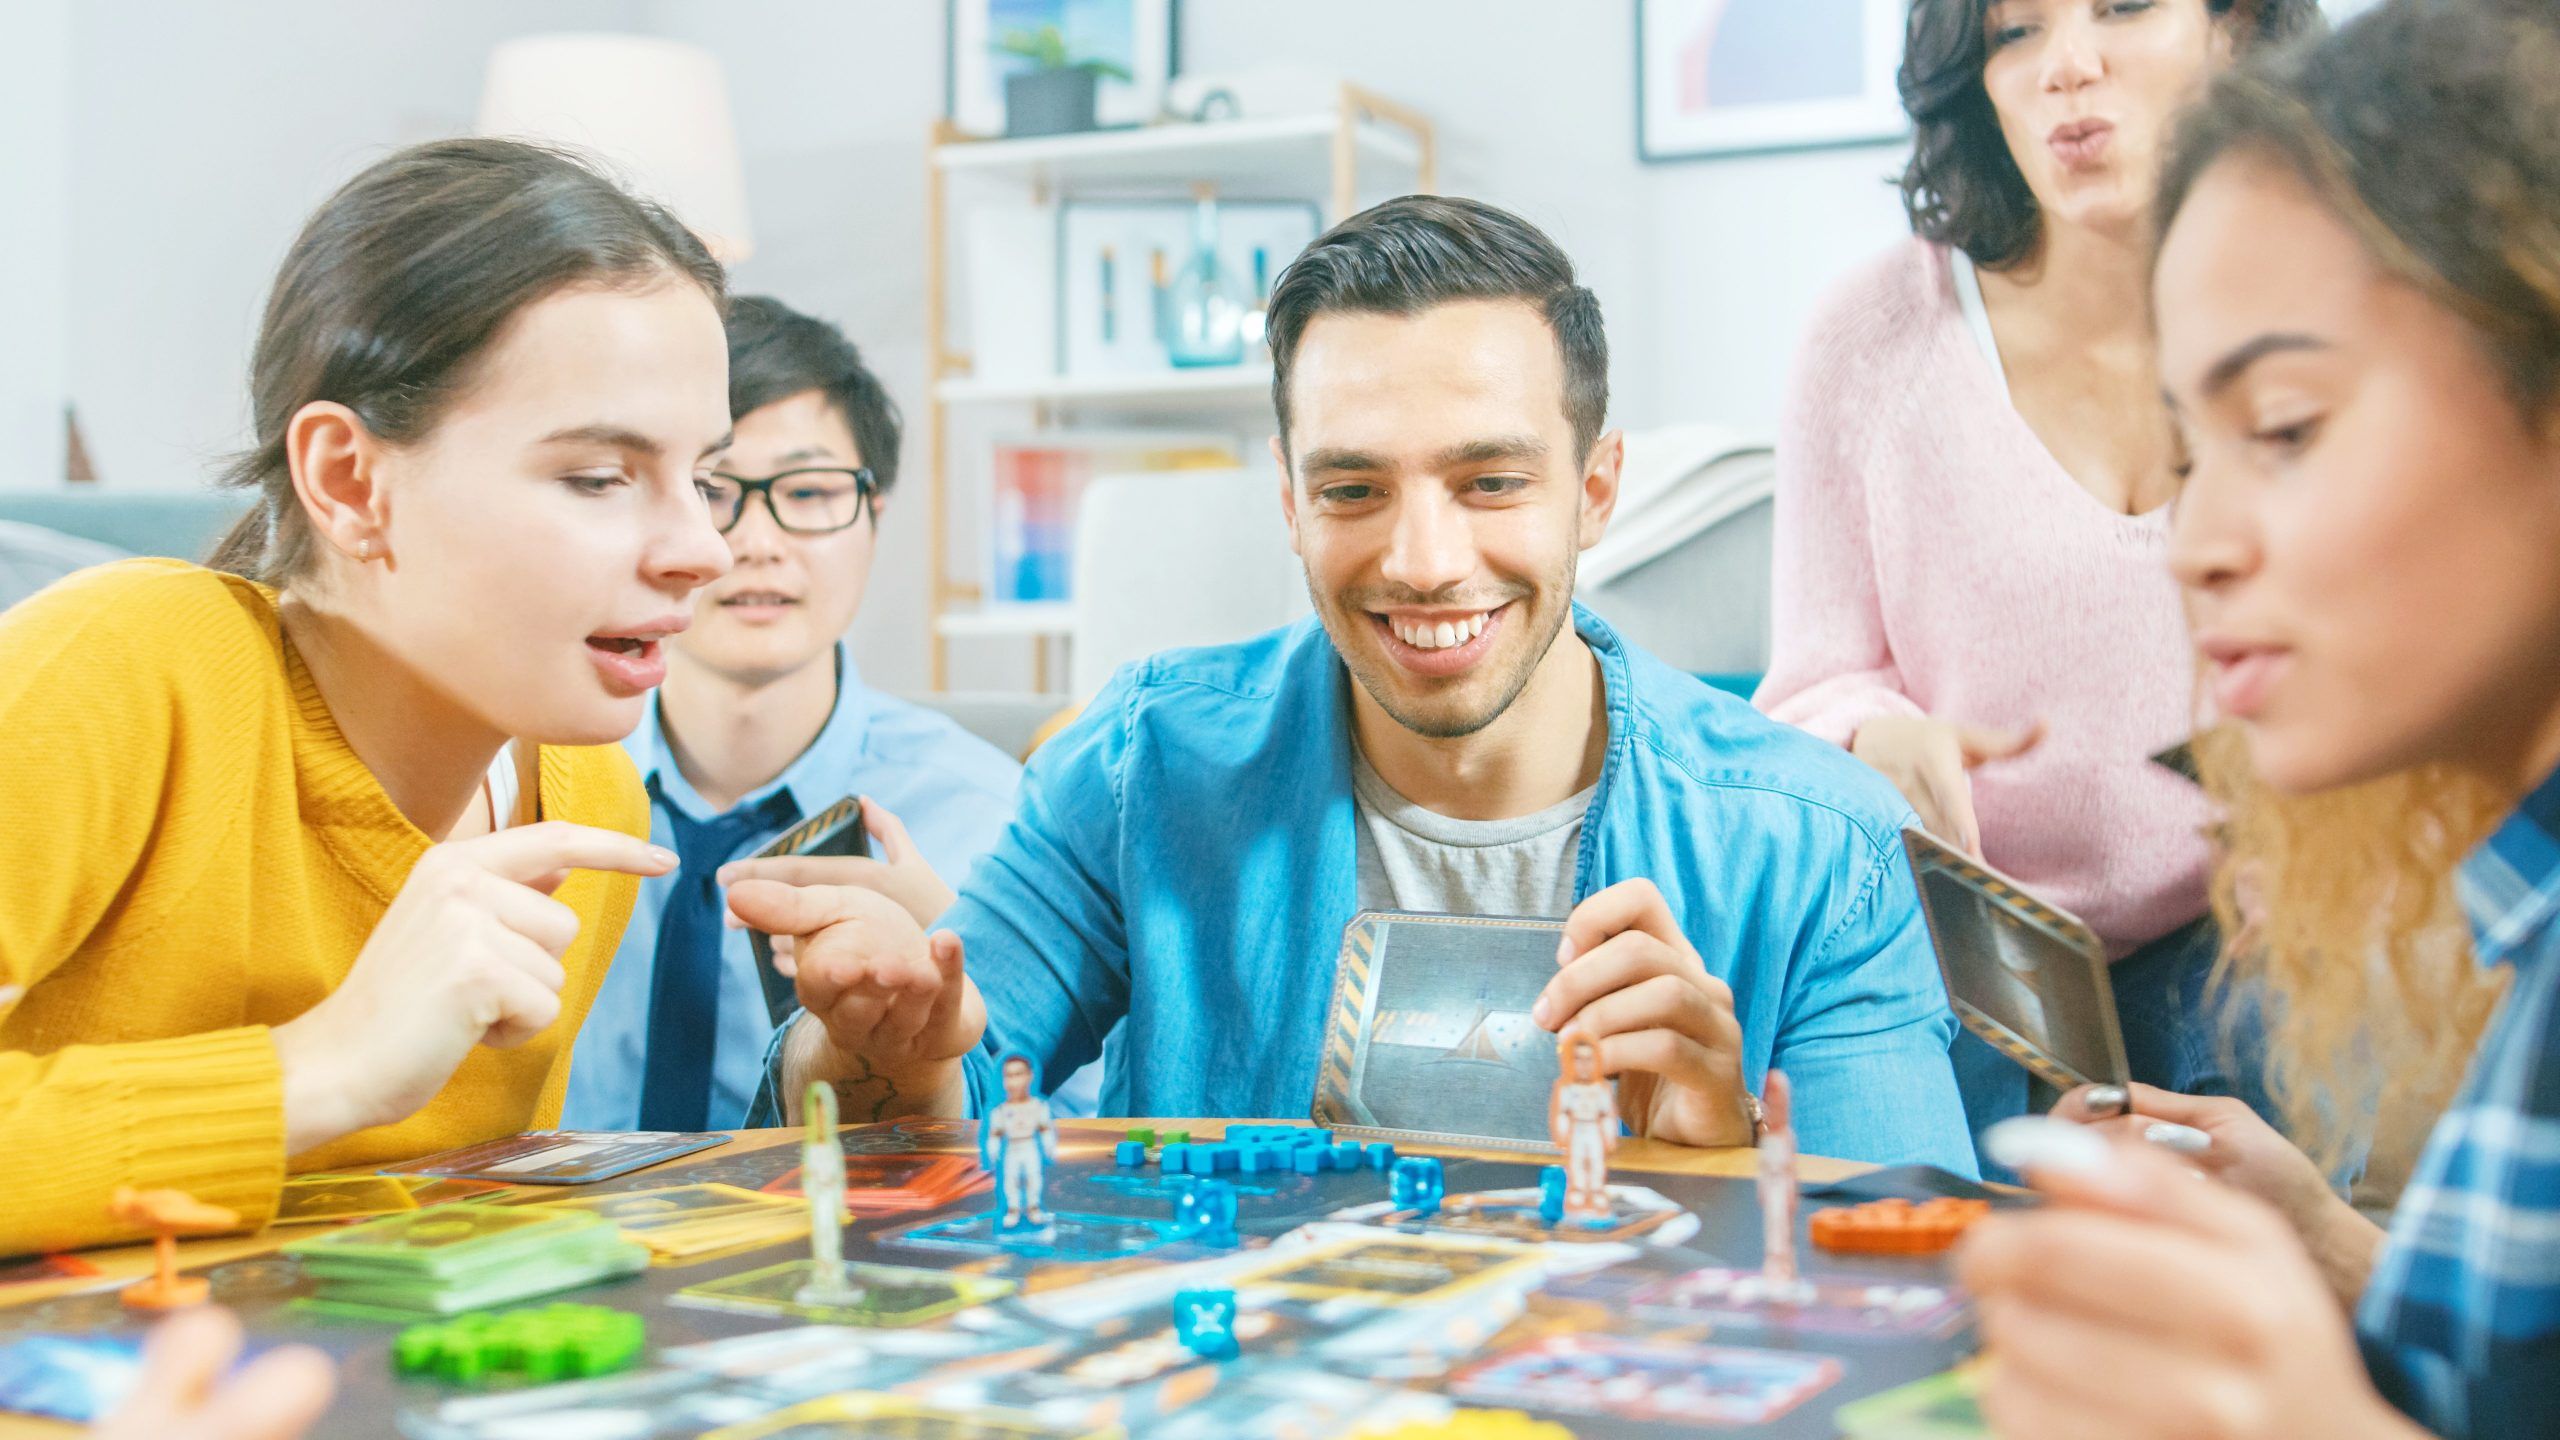 5 board games to spice up family time this summer